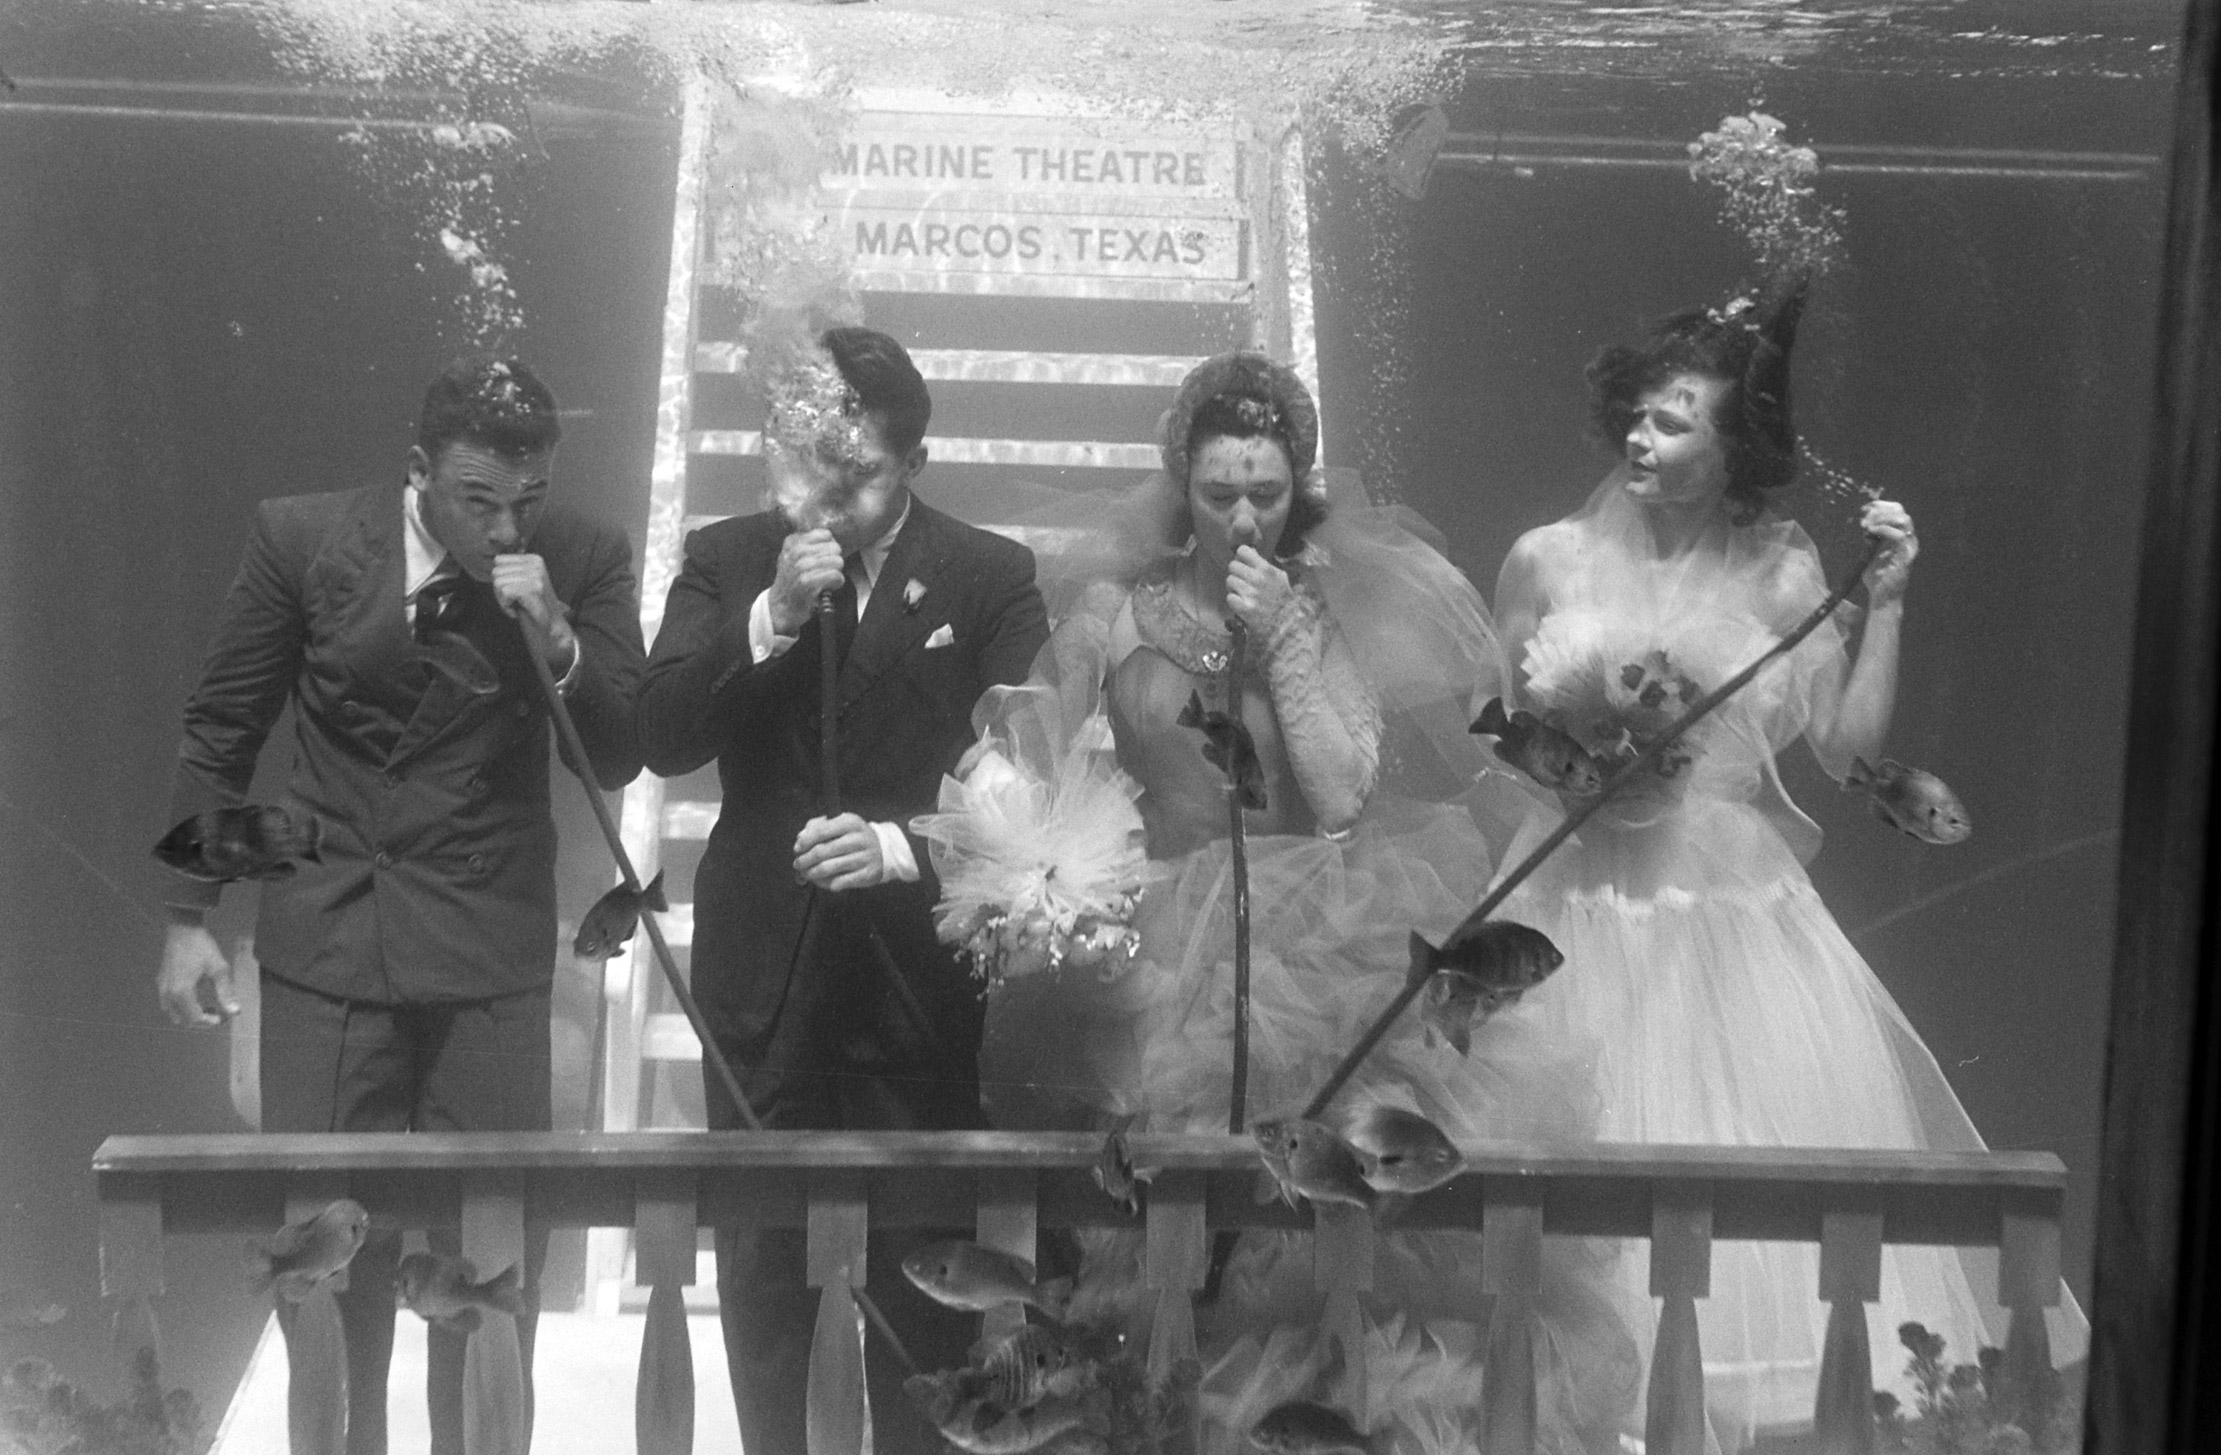 The wedding party during a rehearsal ceremony.